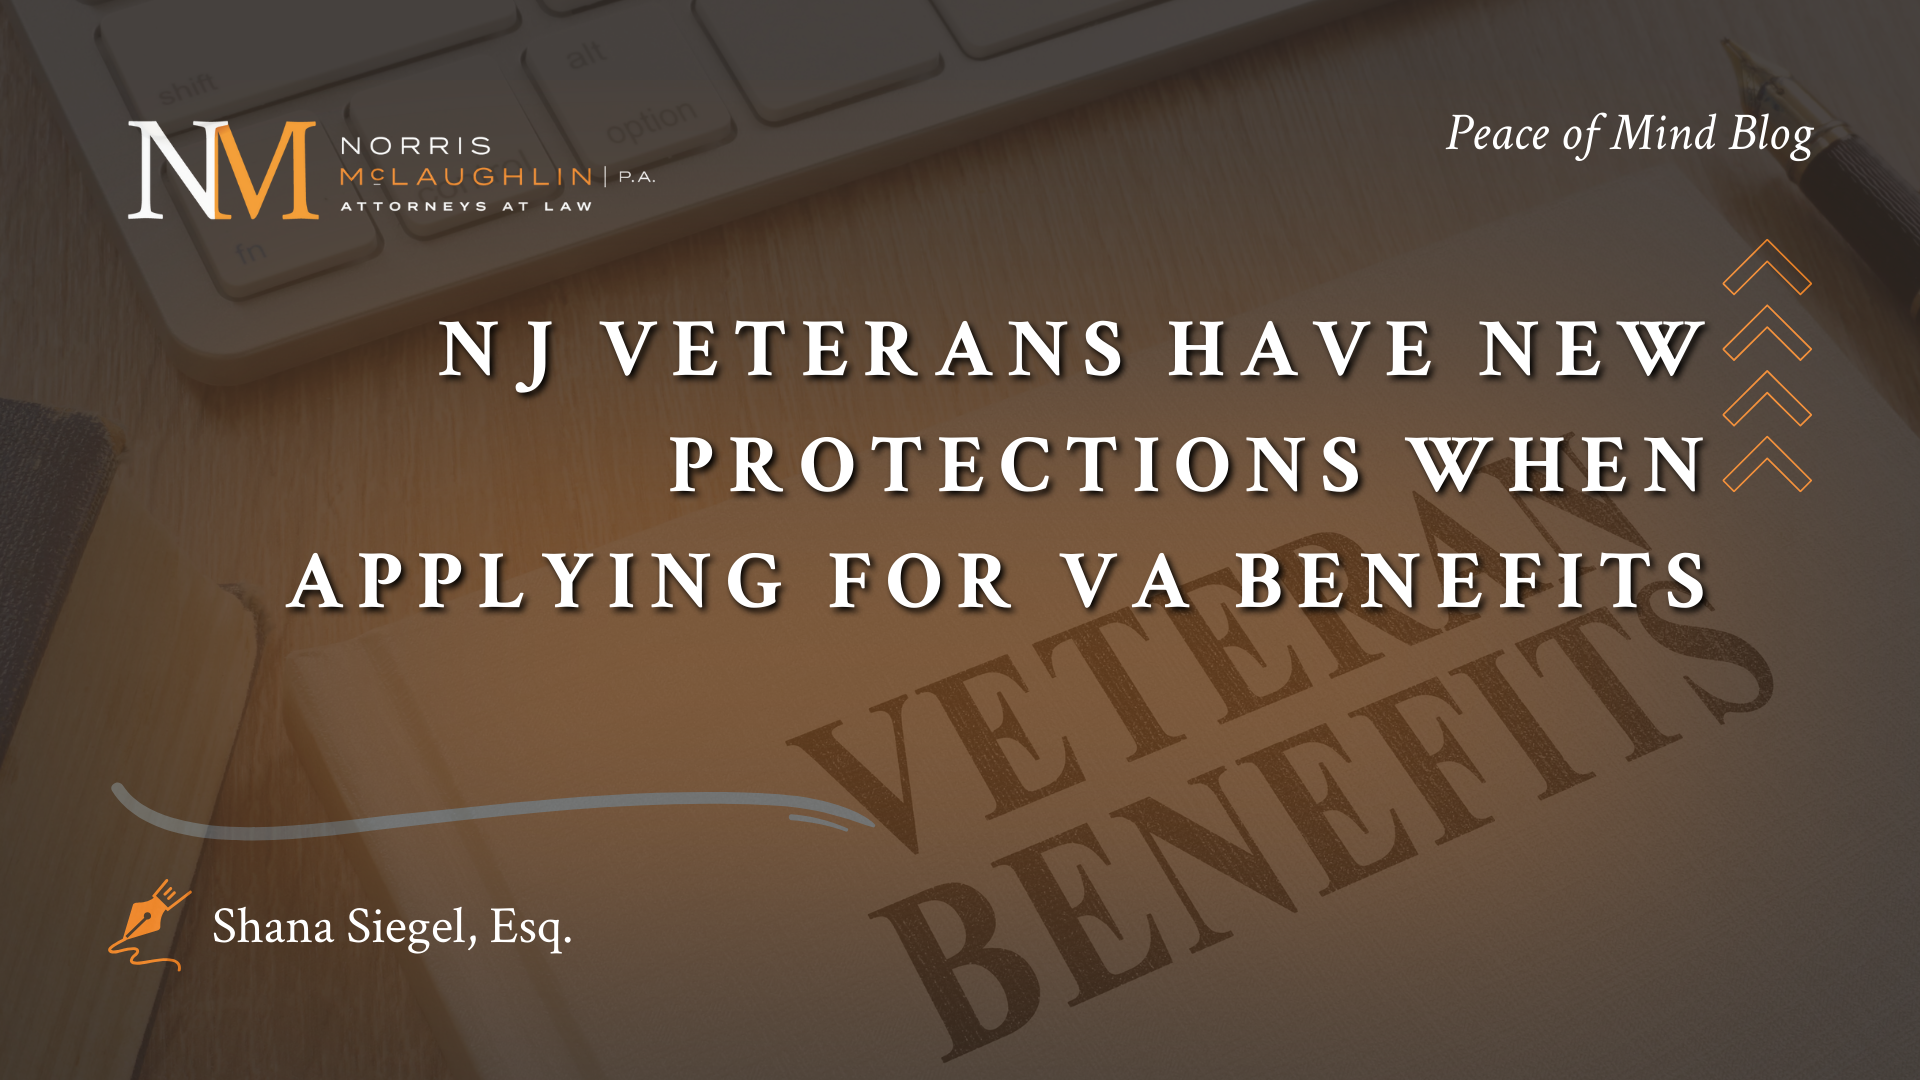 NJ Veterans Have New Protections When Applying for VA Benefits